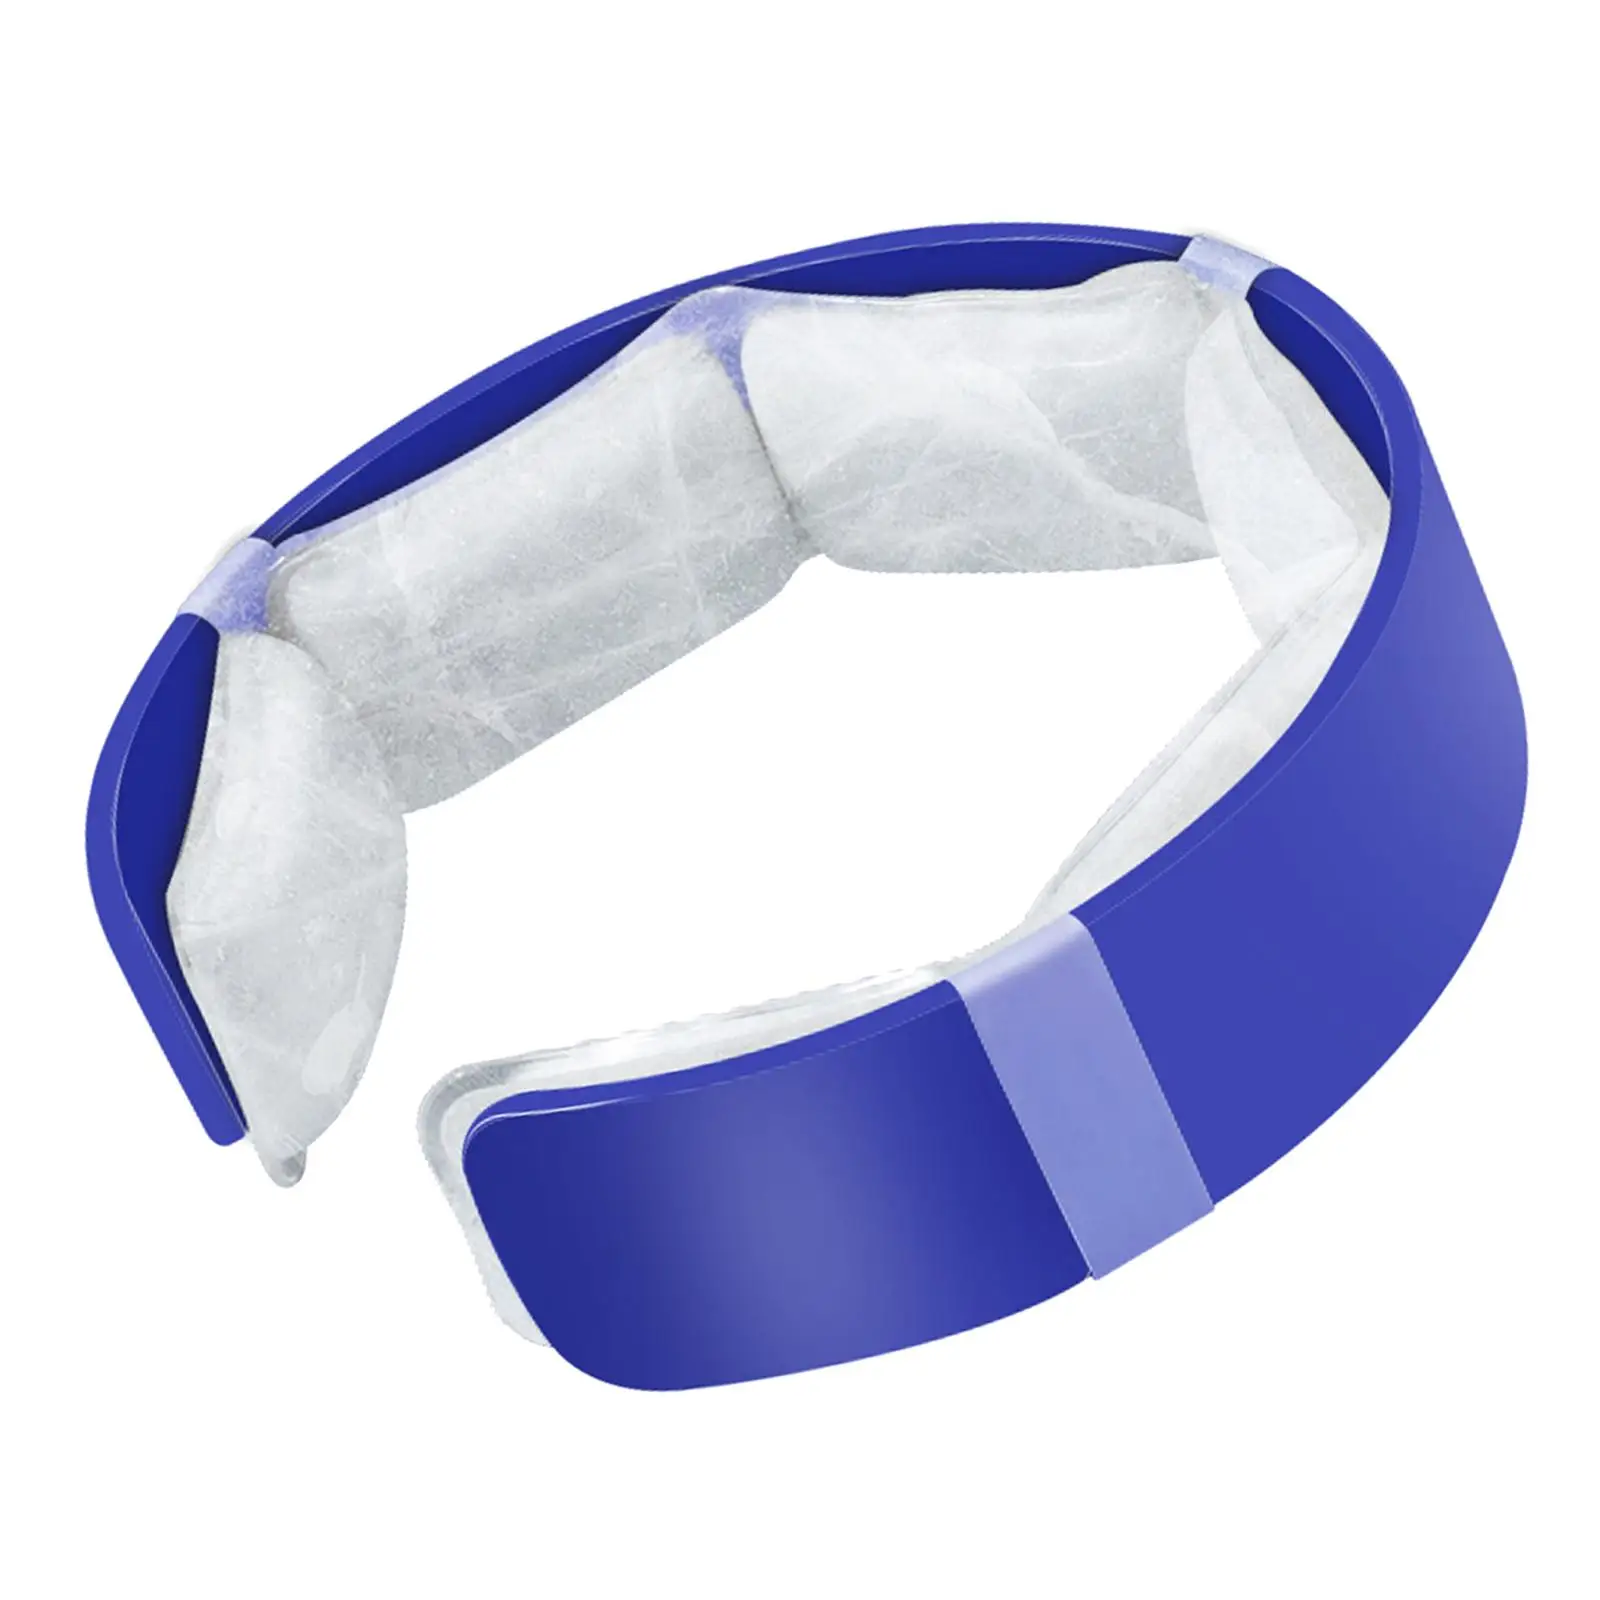 Neck Cooling Tube Wearable Comfortable Cooler Cooling Neck Wraps Ice Neck Circle for Hot Weather for Men Women Indoor Workout